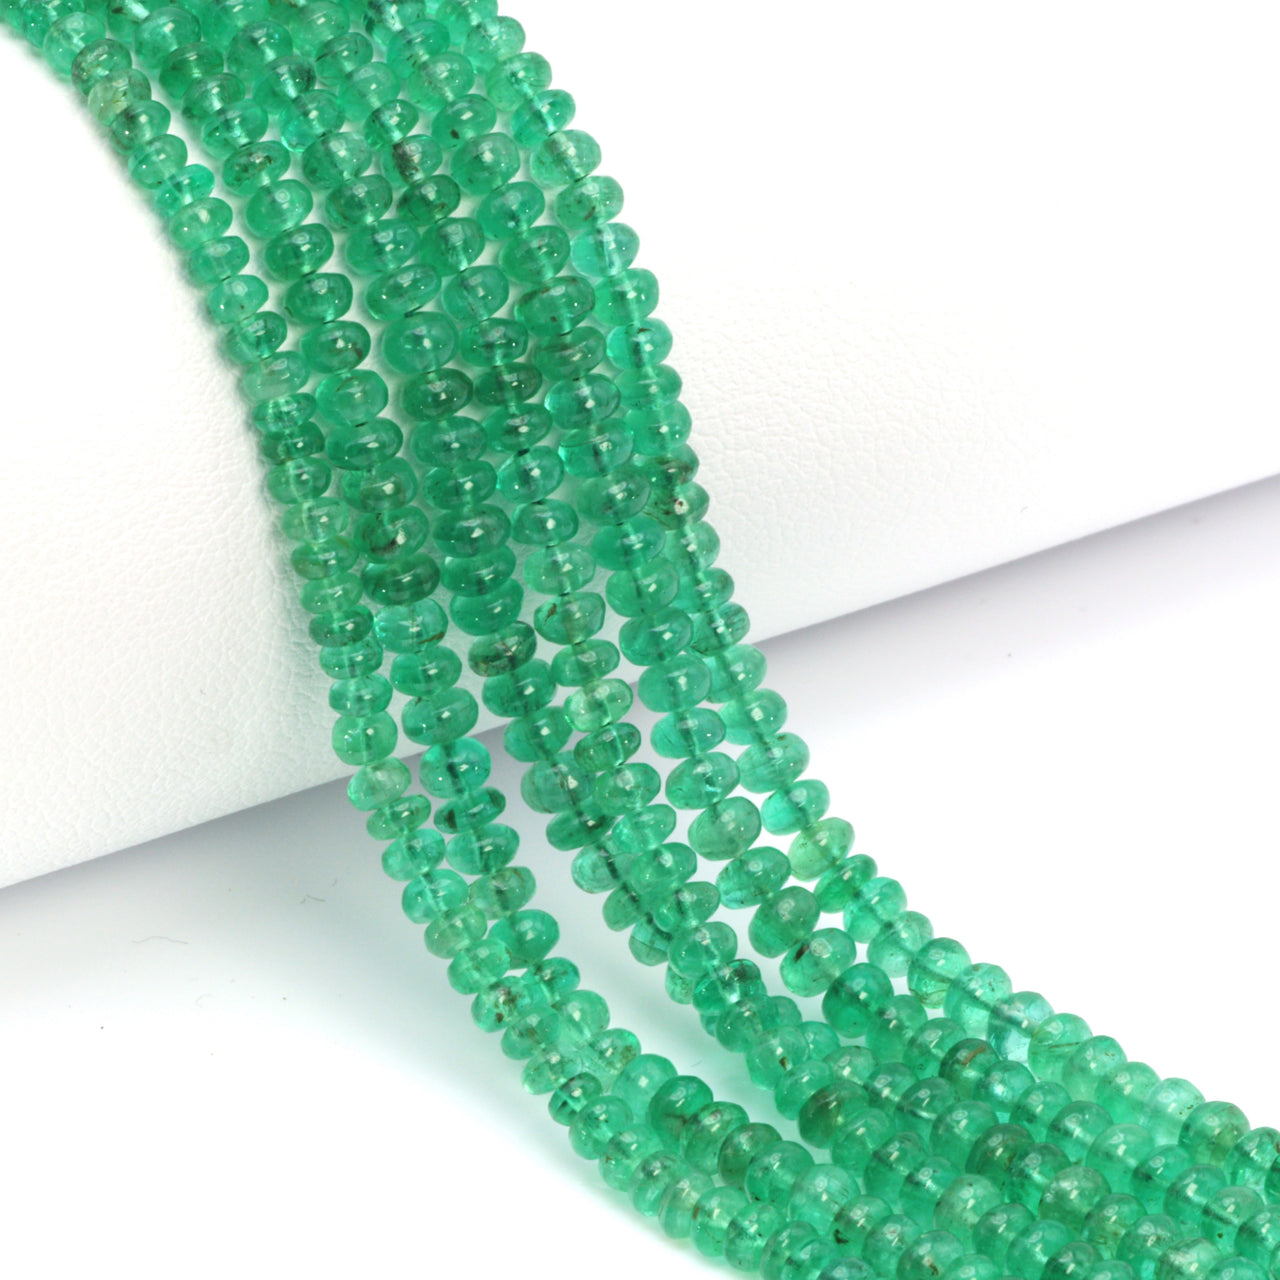 Green Emerald 3mm Smooth Rondelles